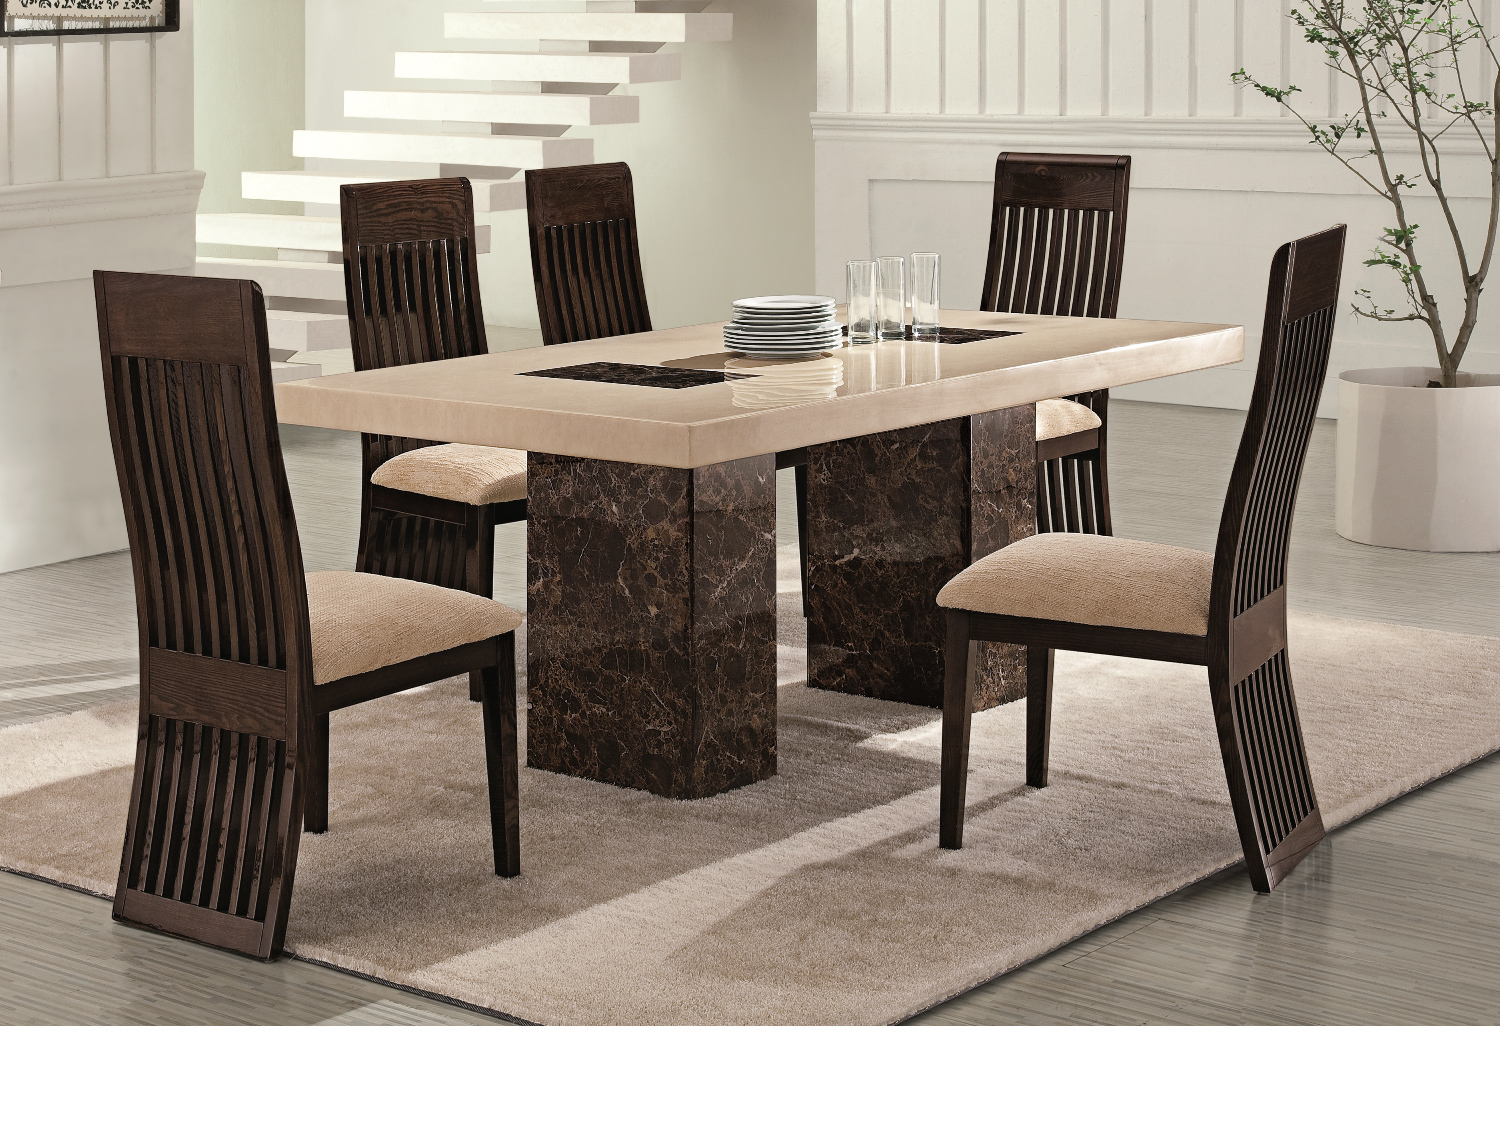 Unusual Dining Table Royals Courage Unique Dining Tables with sizing 1500 X 1121